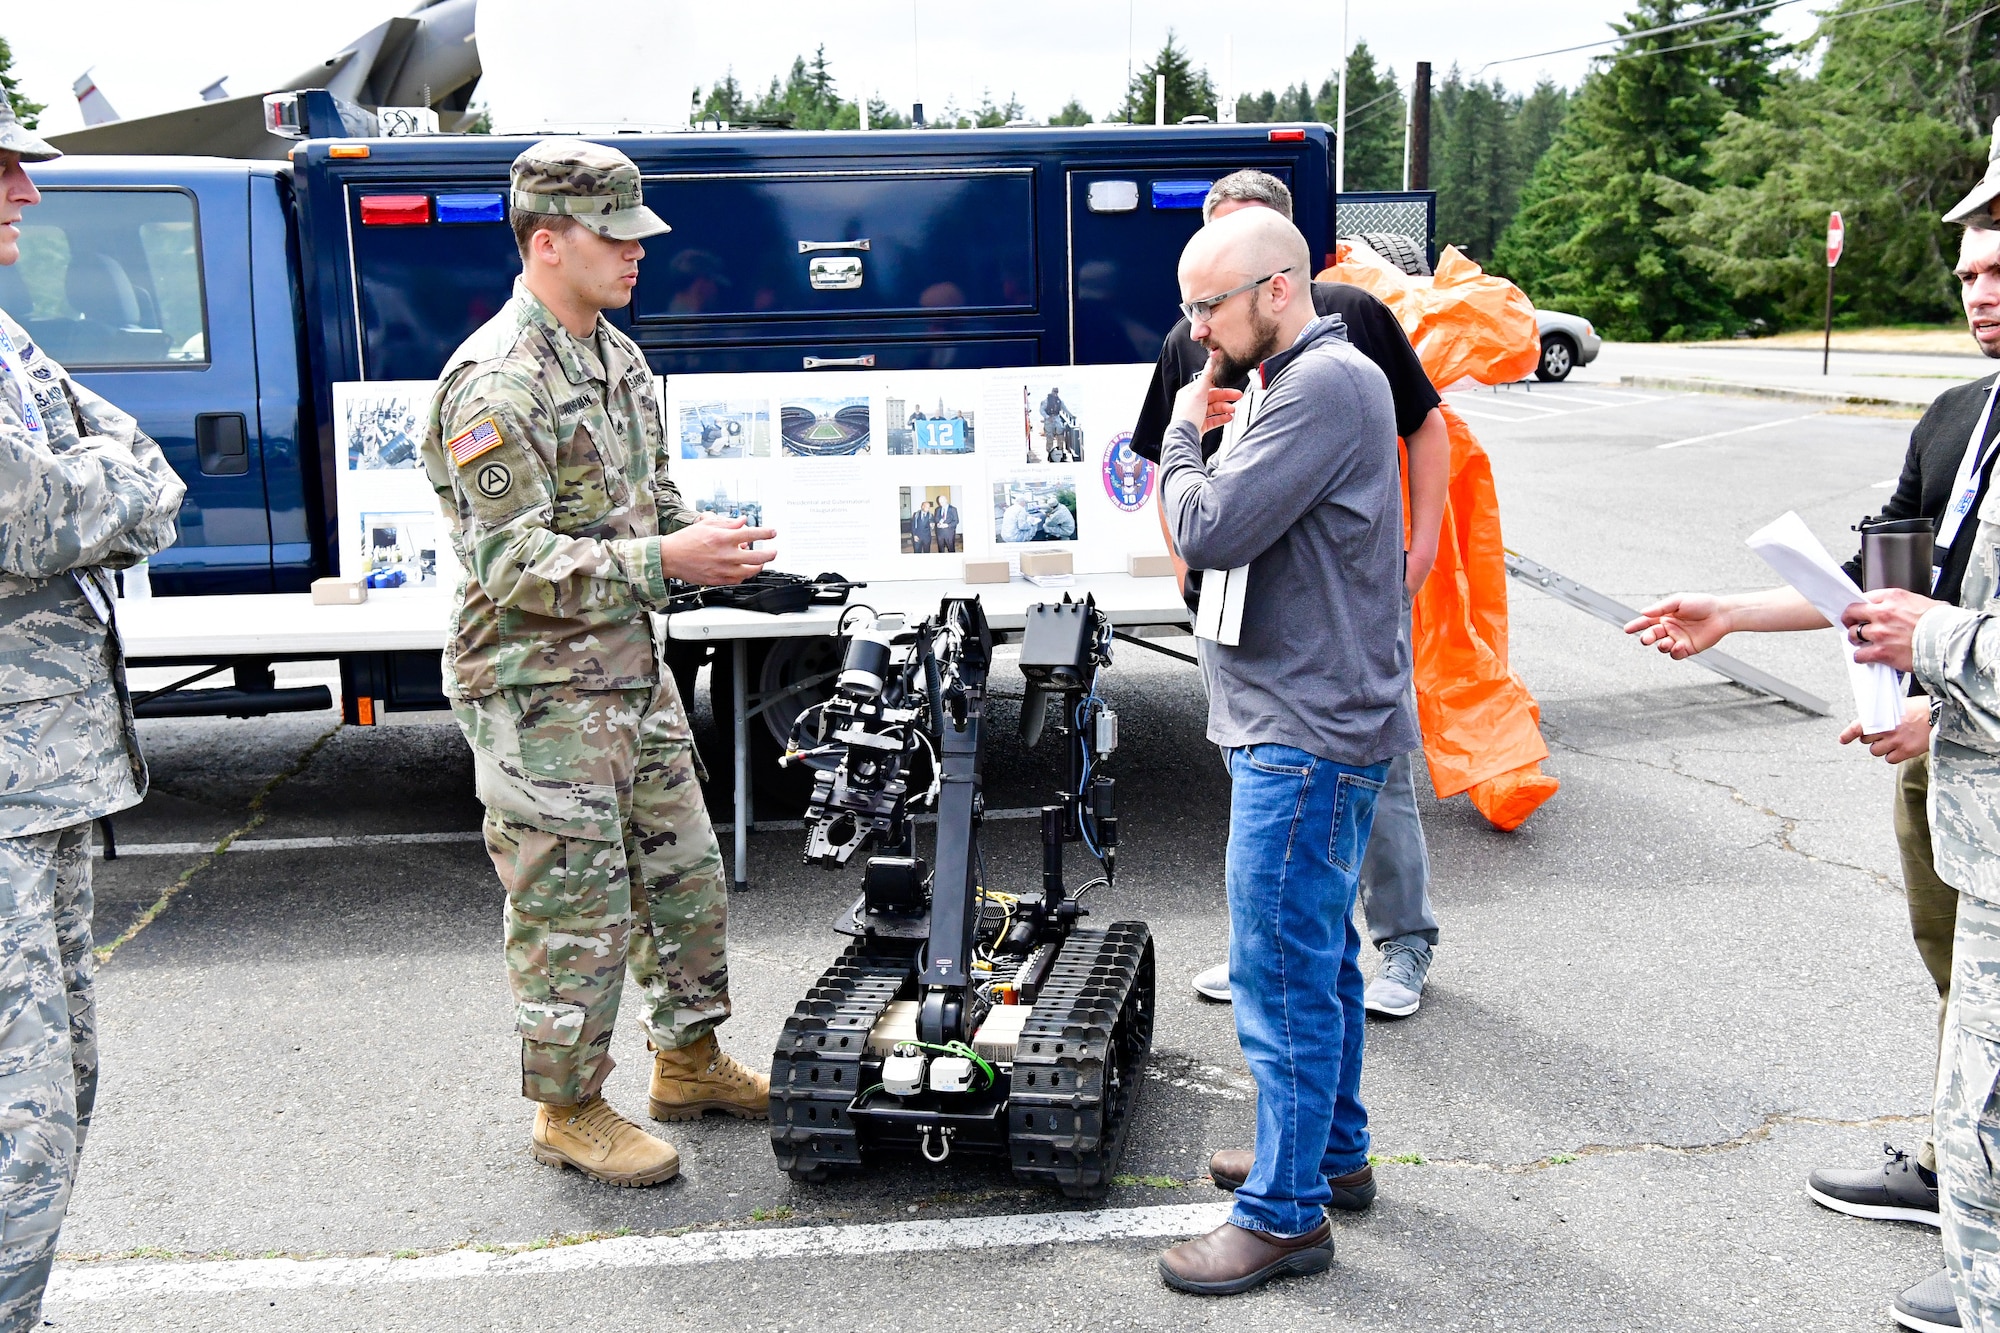 As part of the Employer Support of the Guard and Reserve (ESGR) Bosslift program, civilian employers talk with the Washington National Guard's 10th Civil Support Team about their specialized equipment that is used to identify and assess suspected weapons of mass destruction hazards June 7, 2018.  (U.S. Air National Guard photo by Capt. Colette Muller)